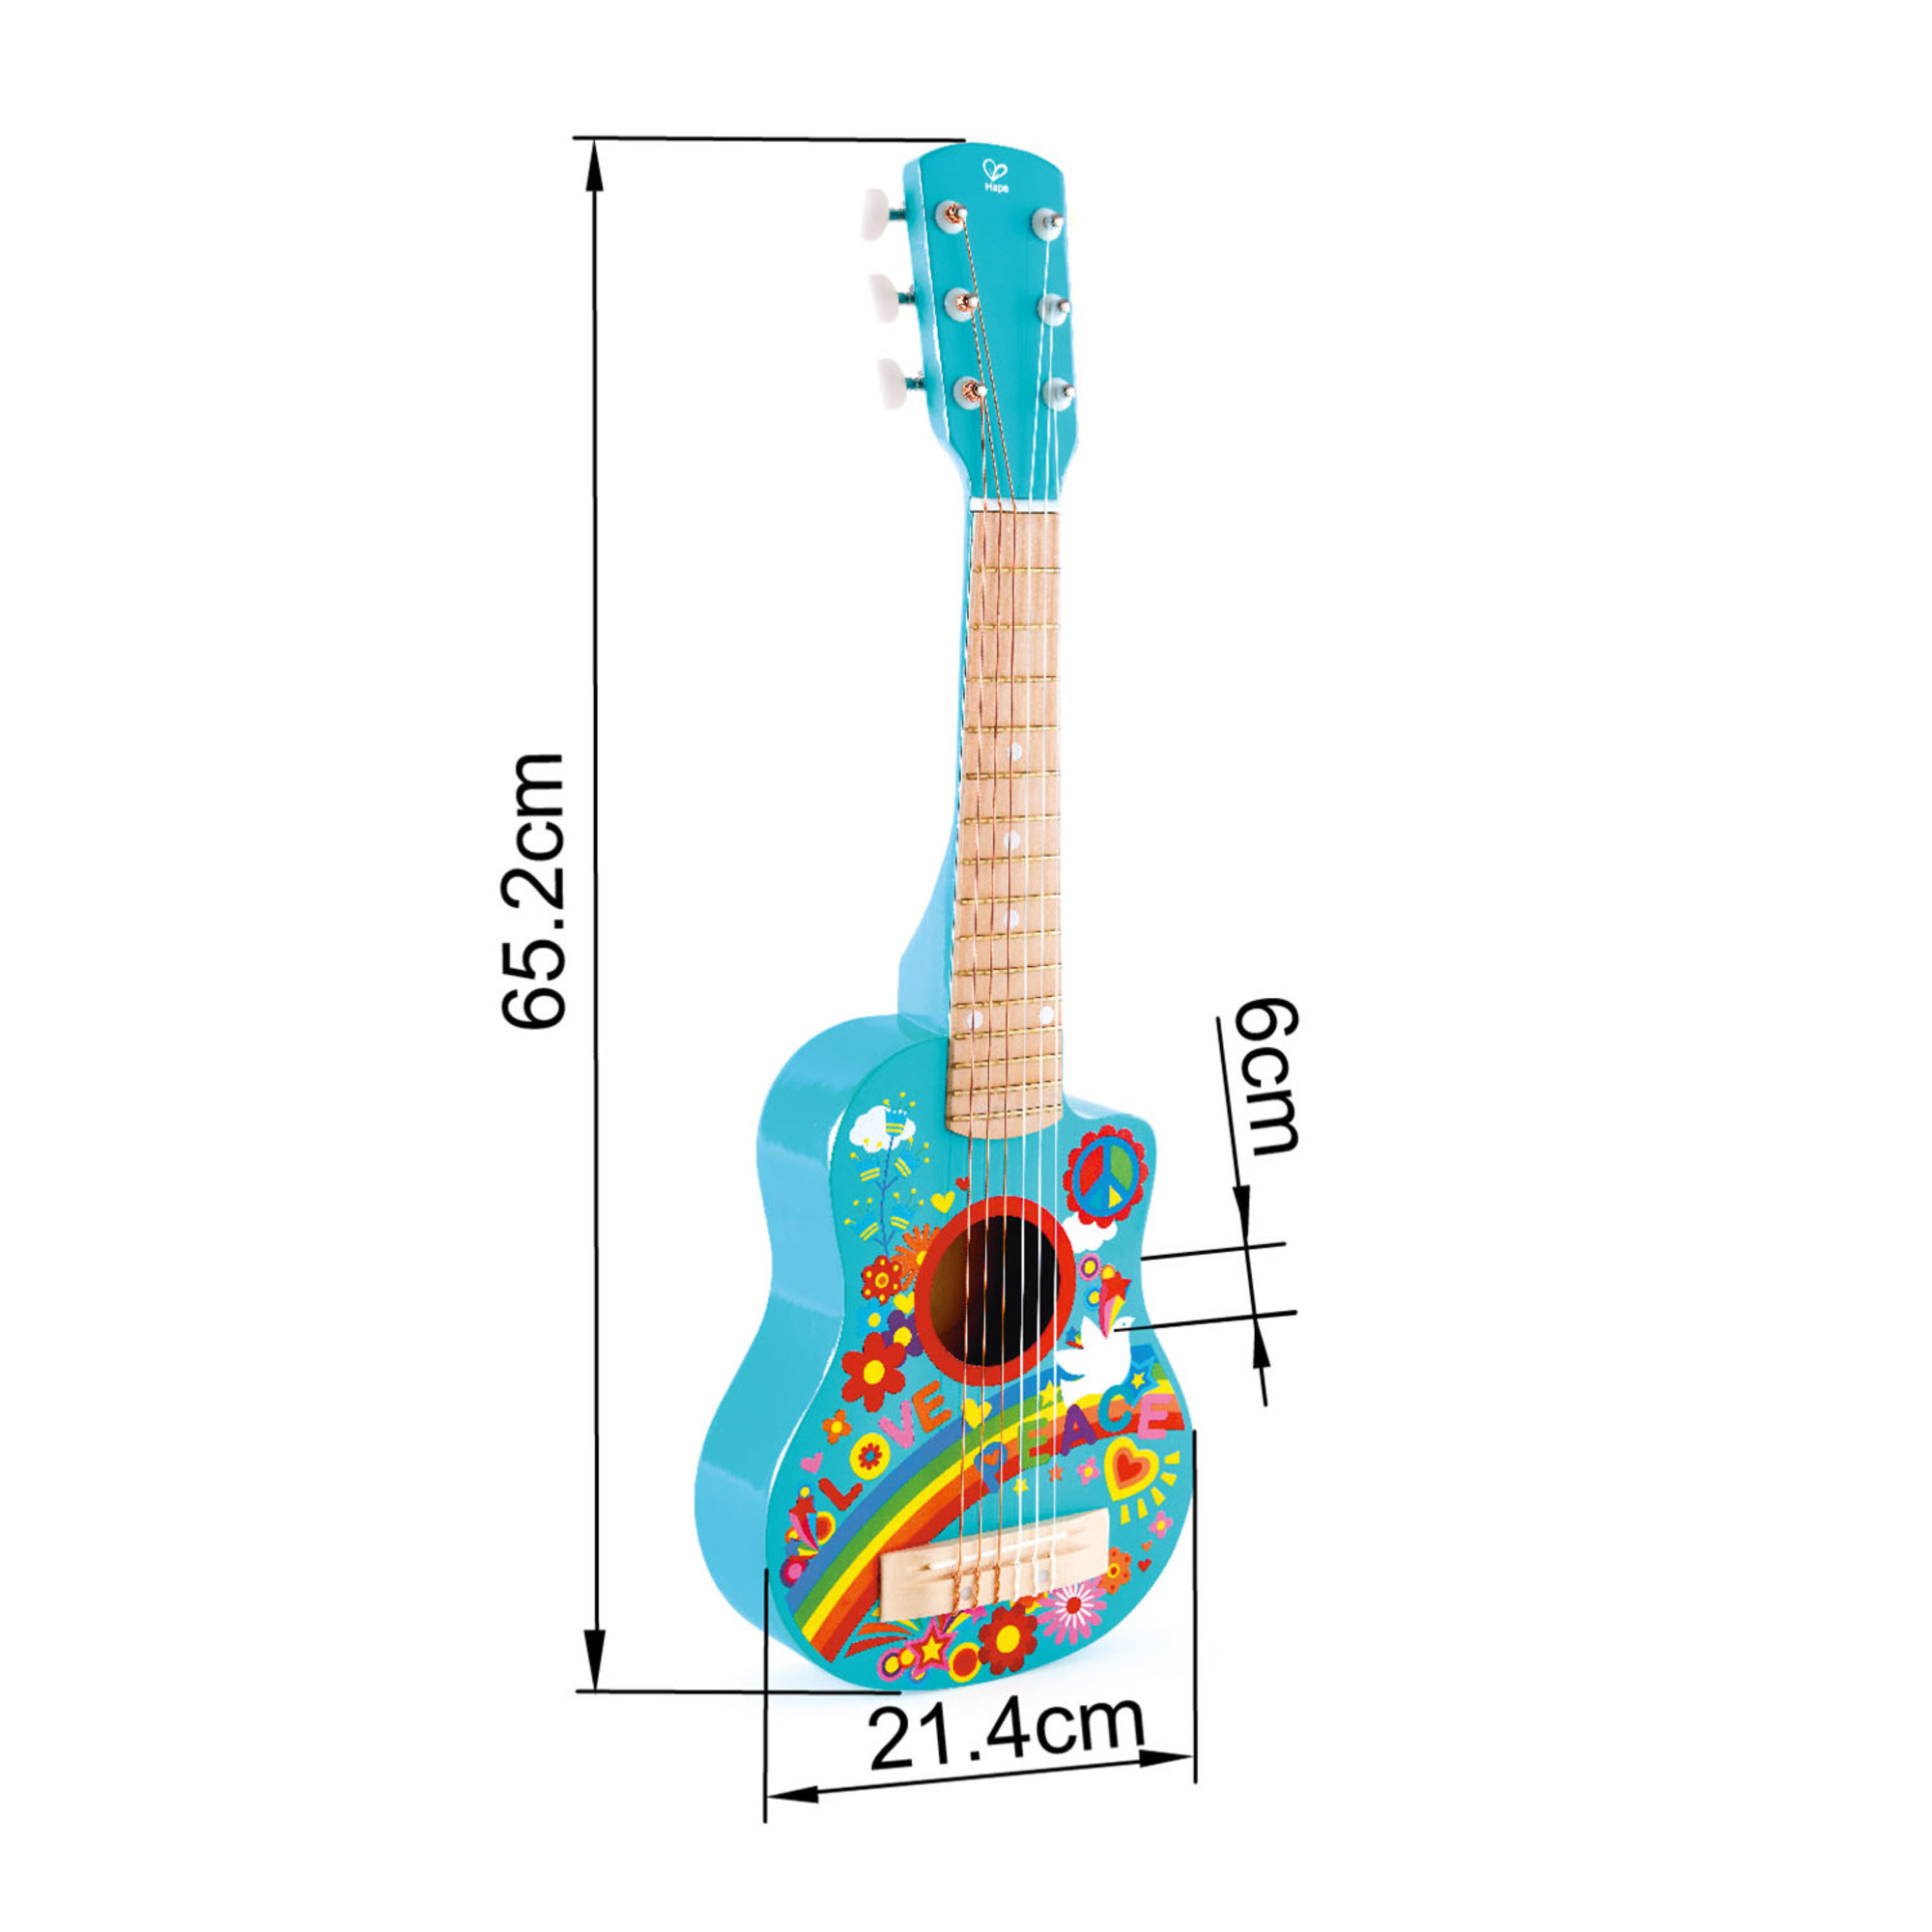 Hape First Flower Power 26" Musical Guitar in Turquoise for Preschool & Toddler - image 3 of 6